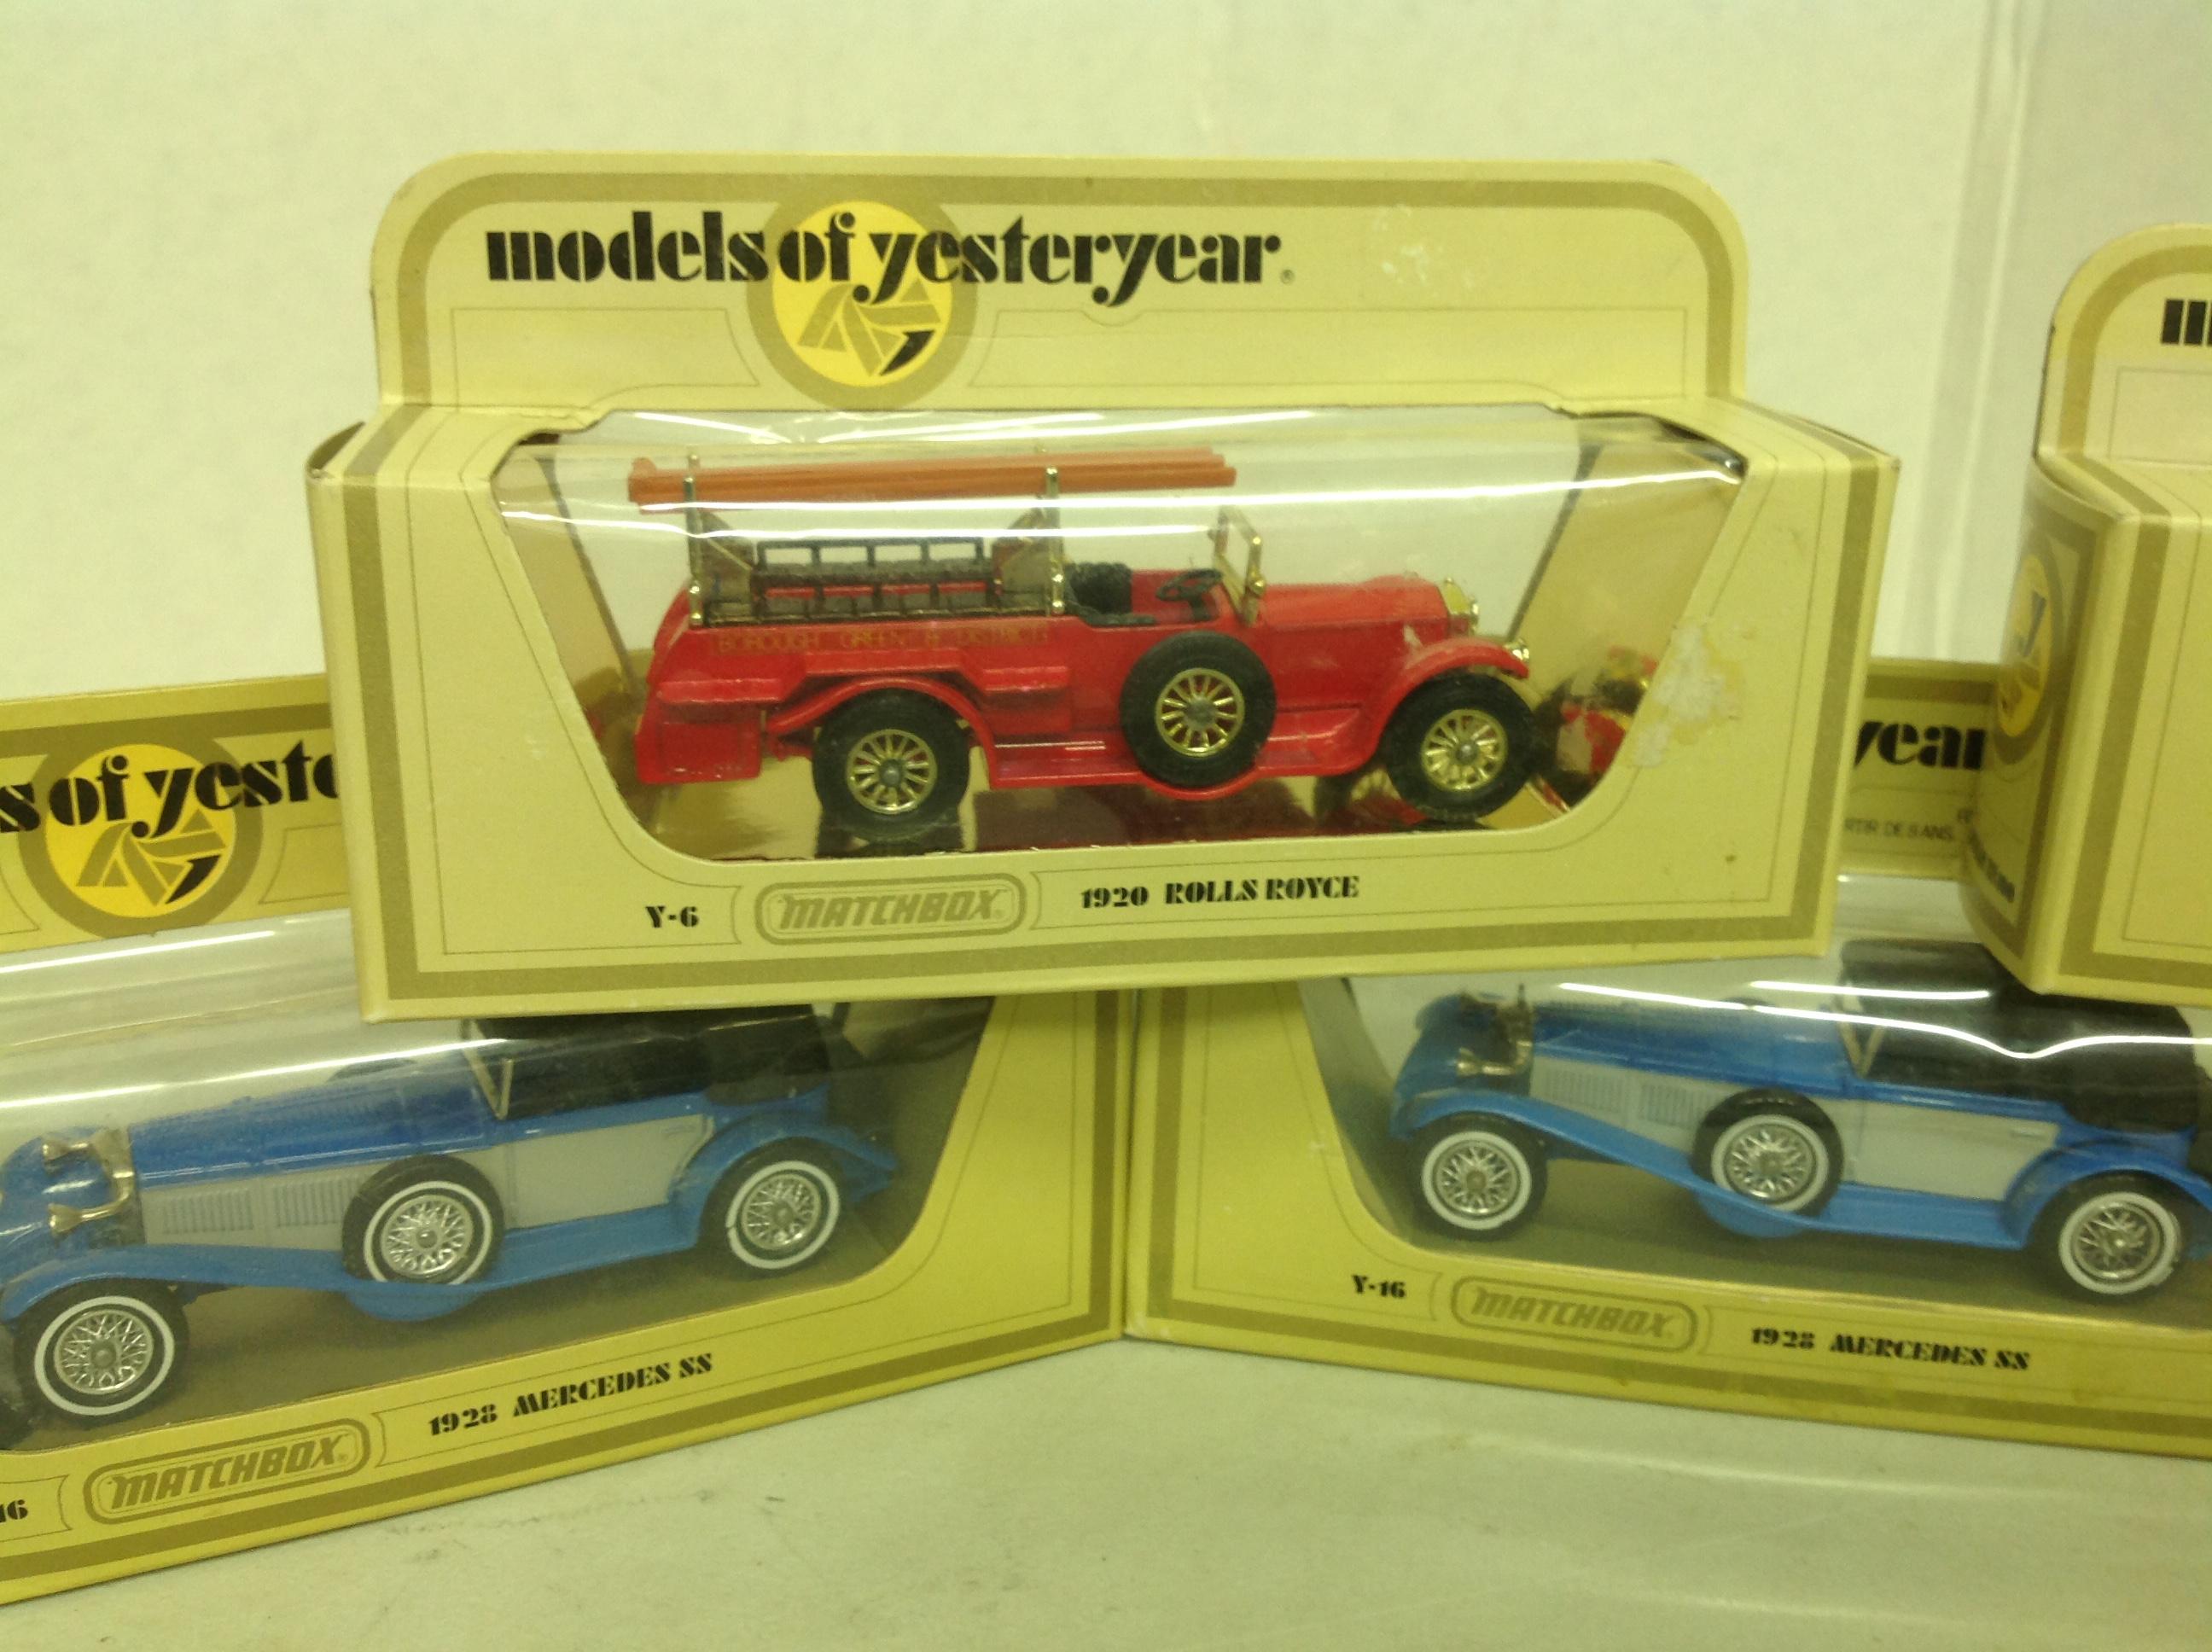 collection of models of yesteryear cars, Match Box